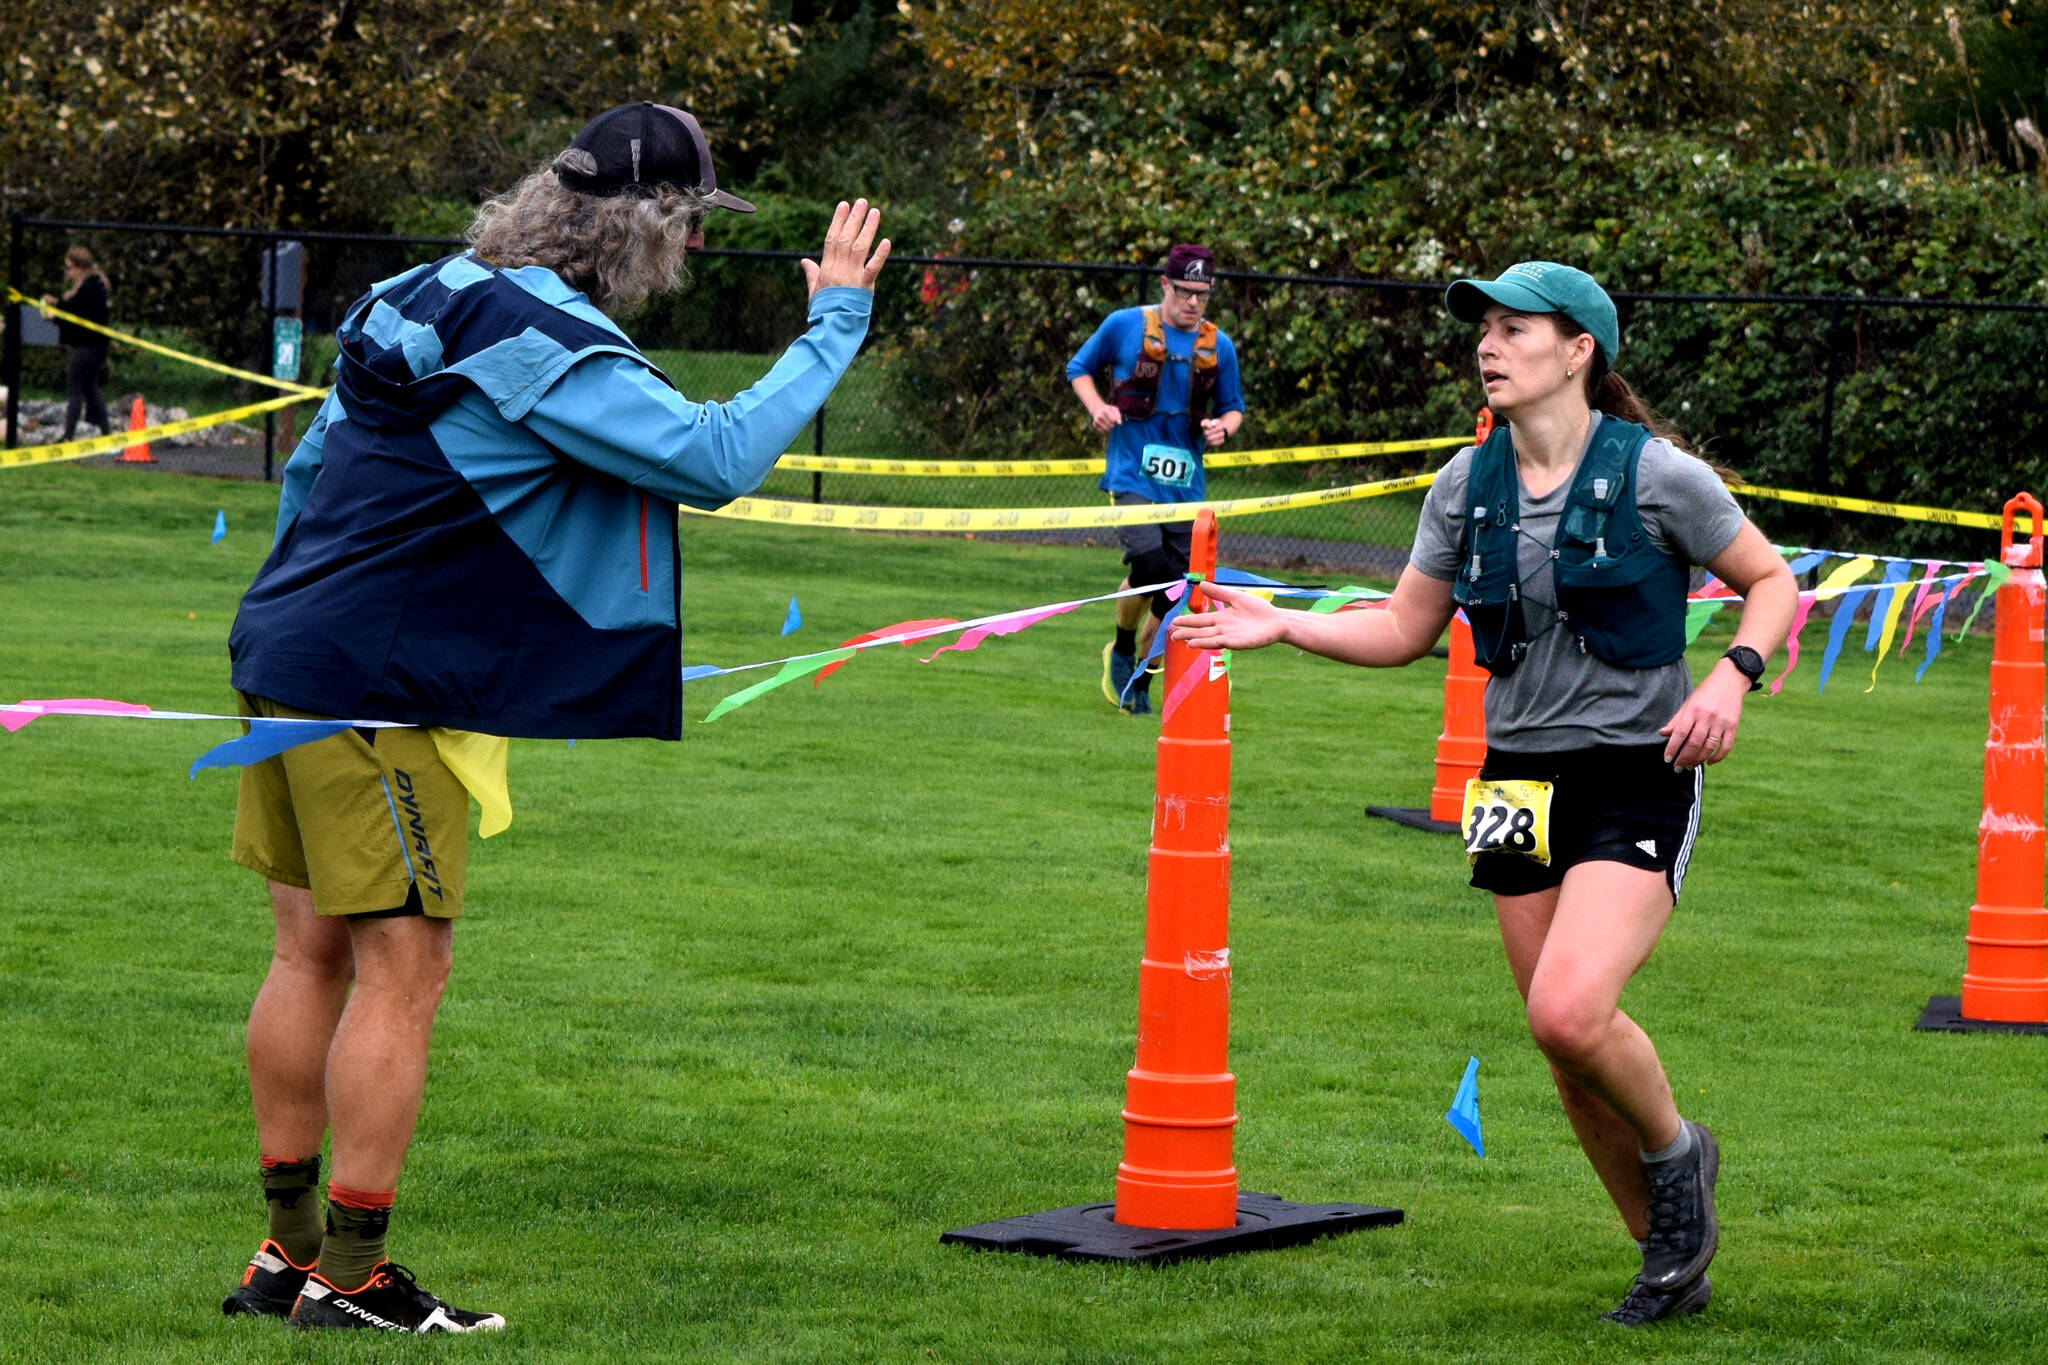 Race organizer Scott Sowle, left, high fives a runner at they finish.